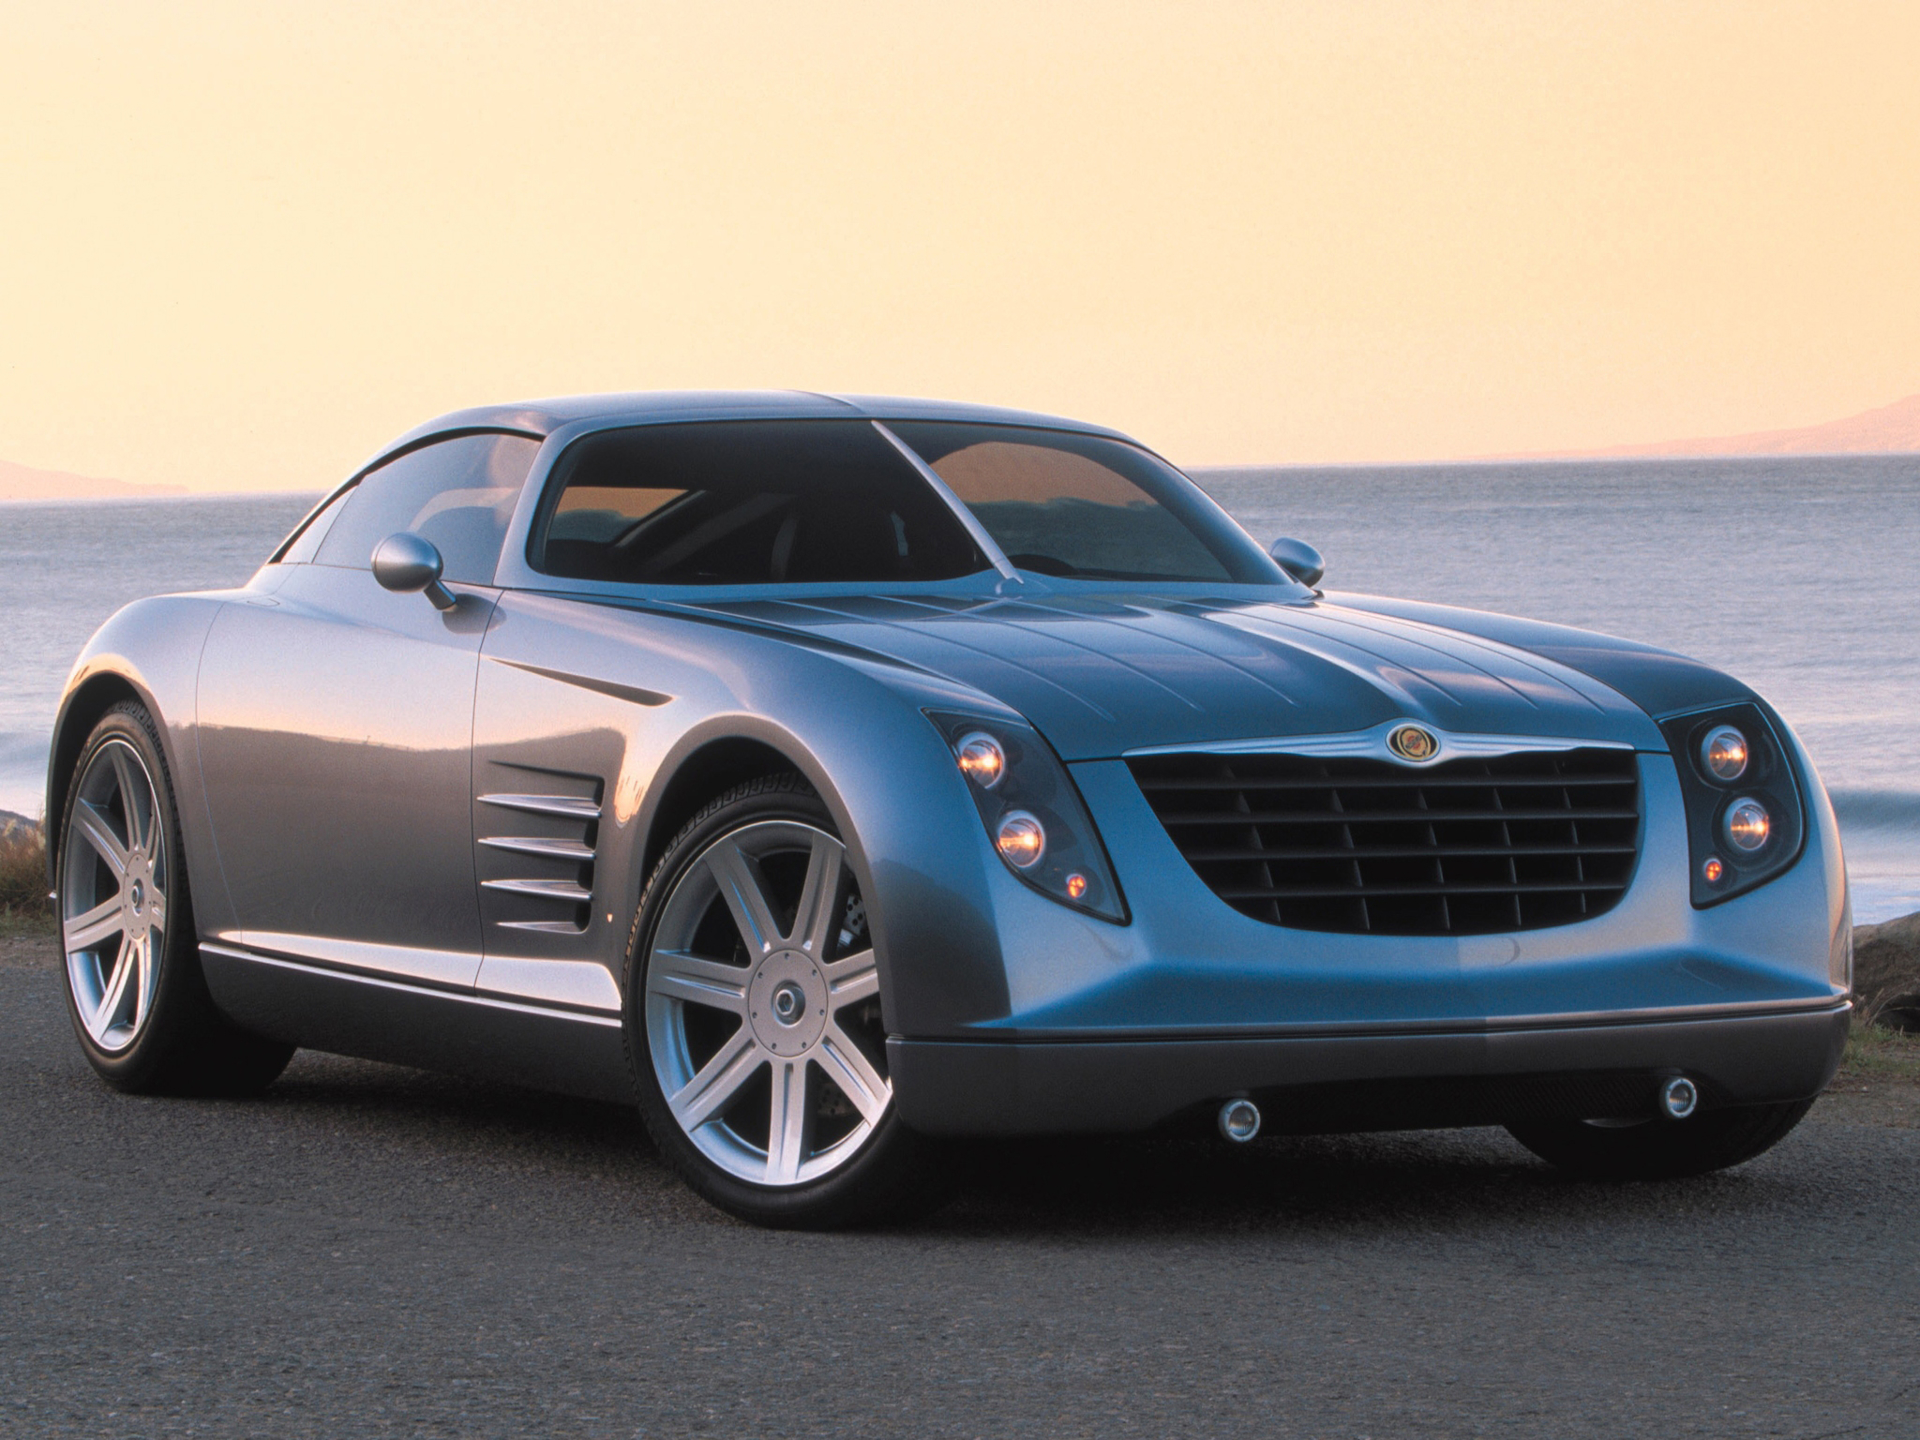 Vehicles Chrysler Crossfire HD Wallpaper | Background Image